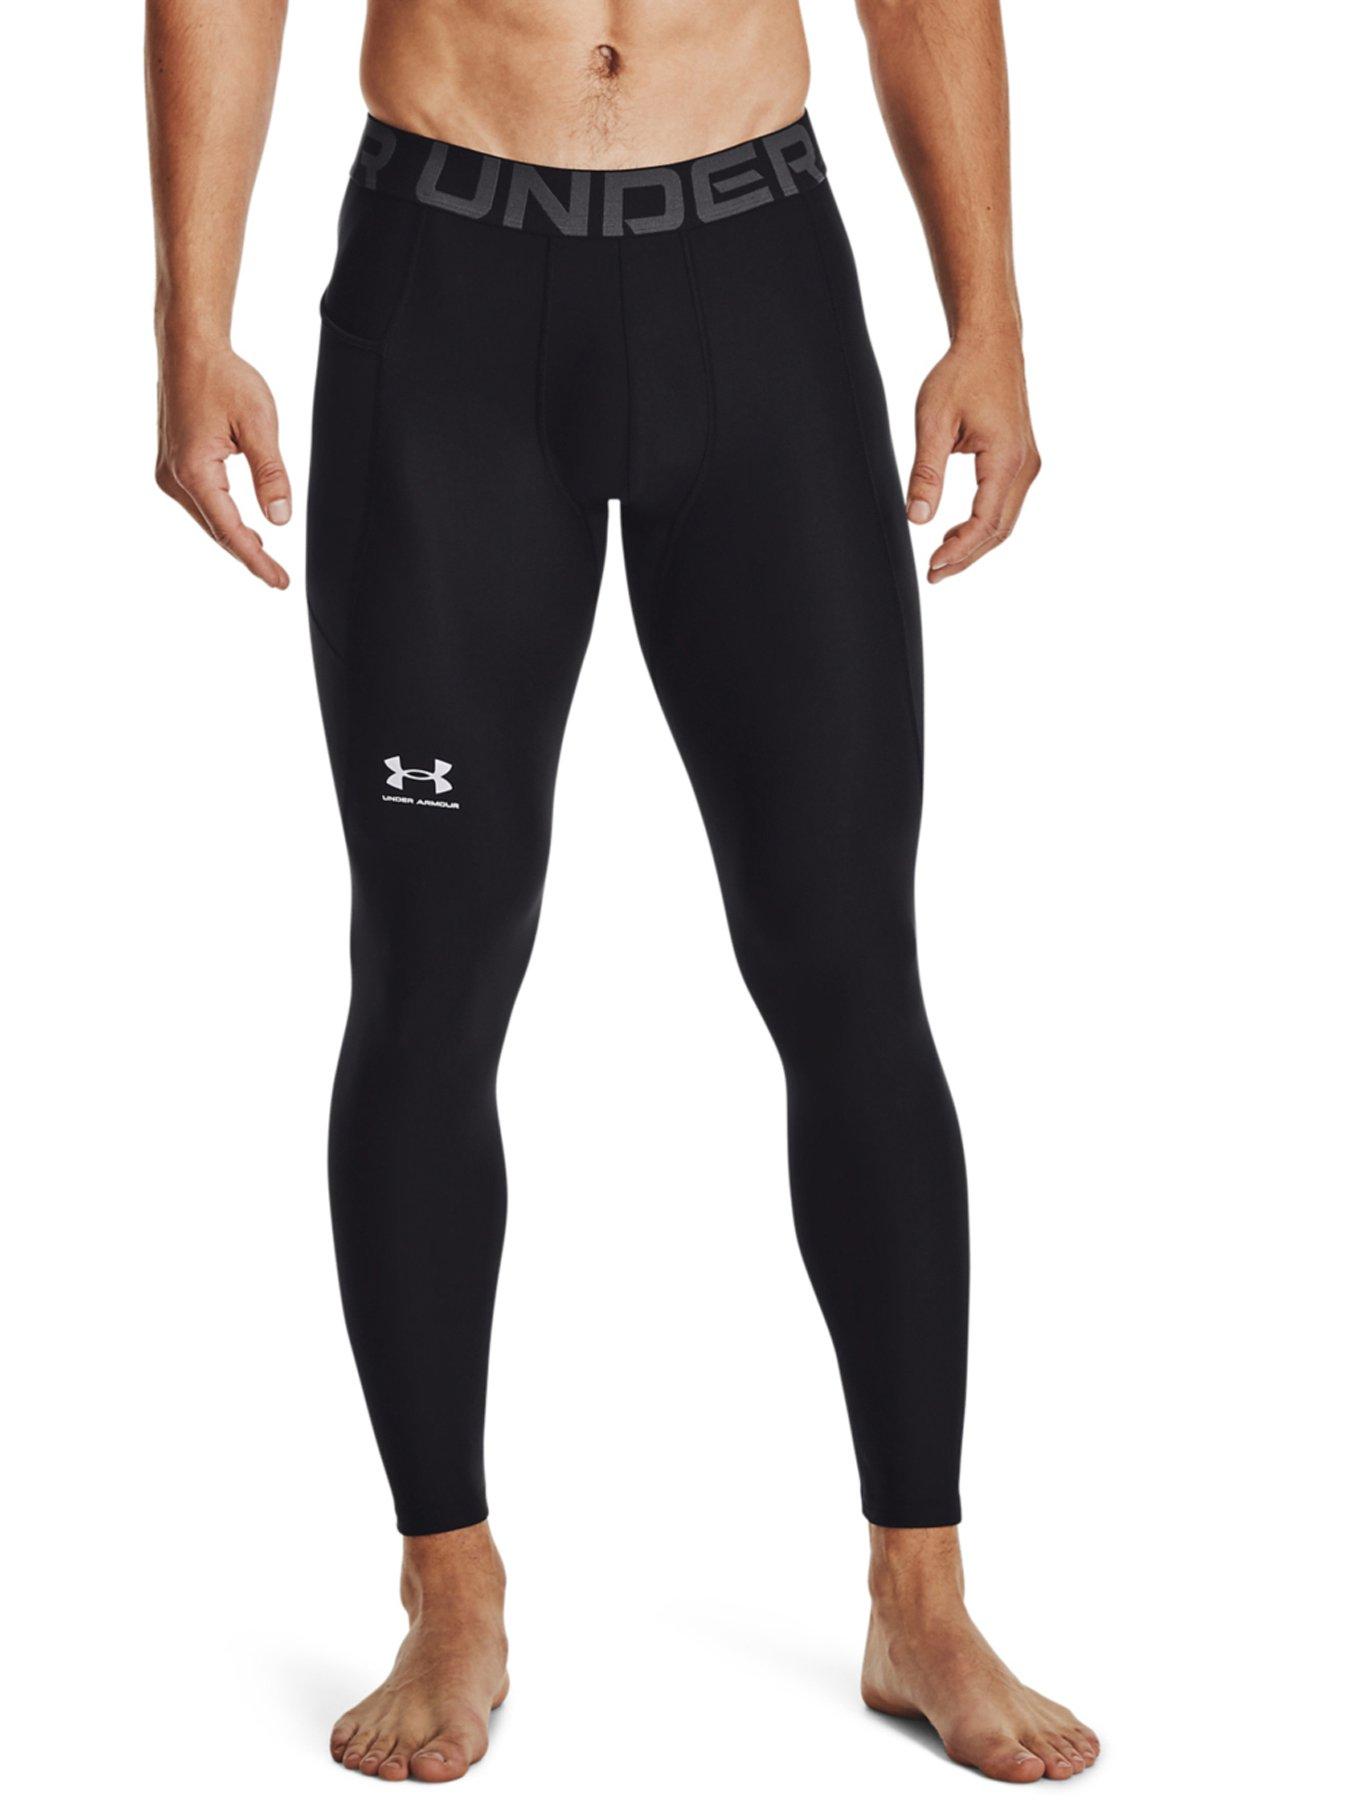 UNDER ARMOUR Heat Gear Armour Tights - Black/White